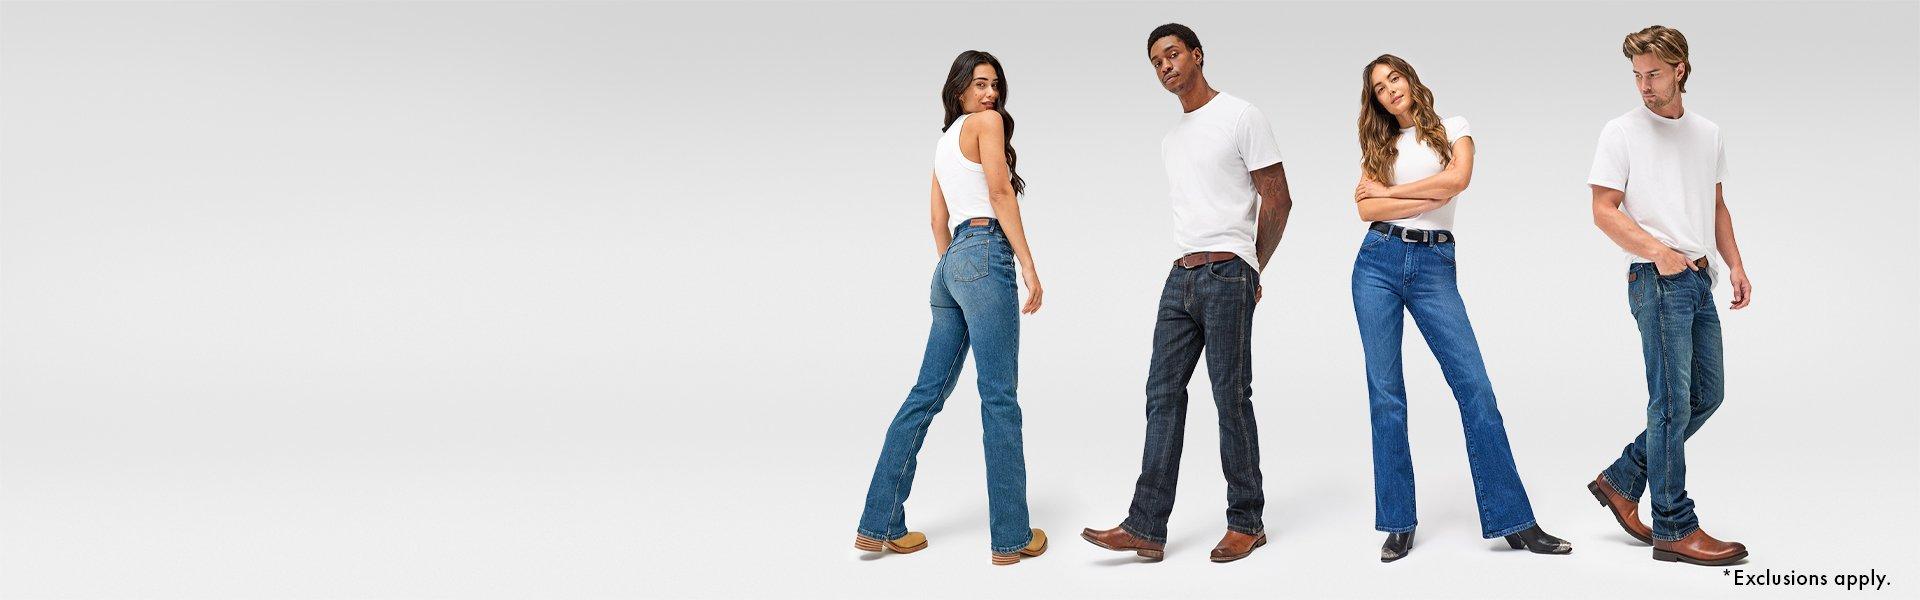 25% OFF JEANS*